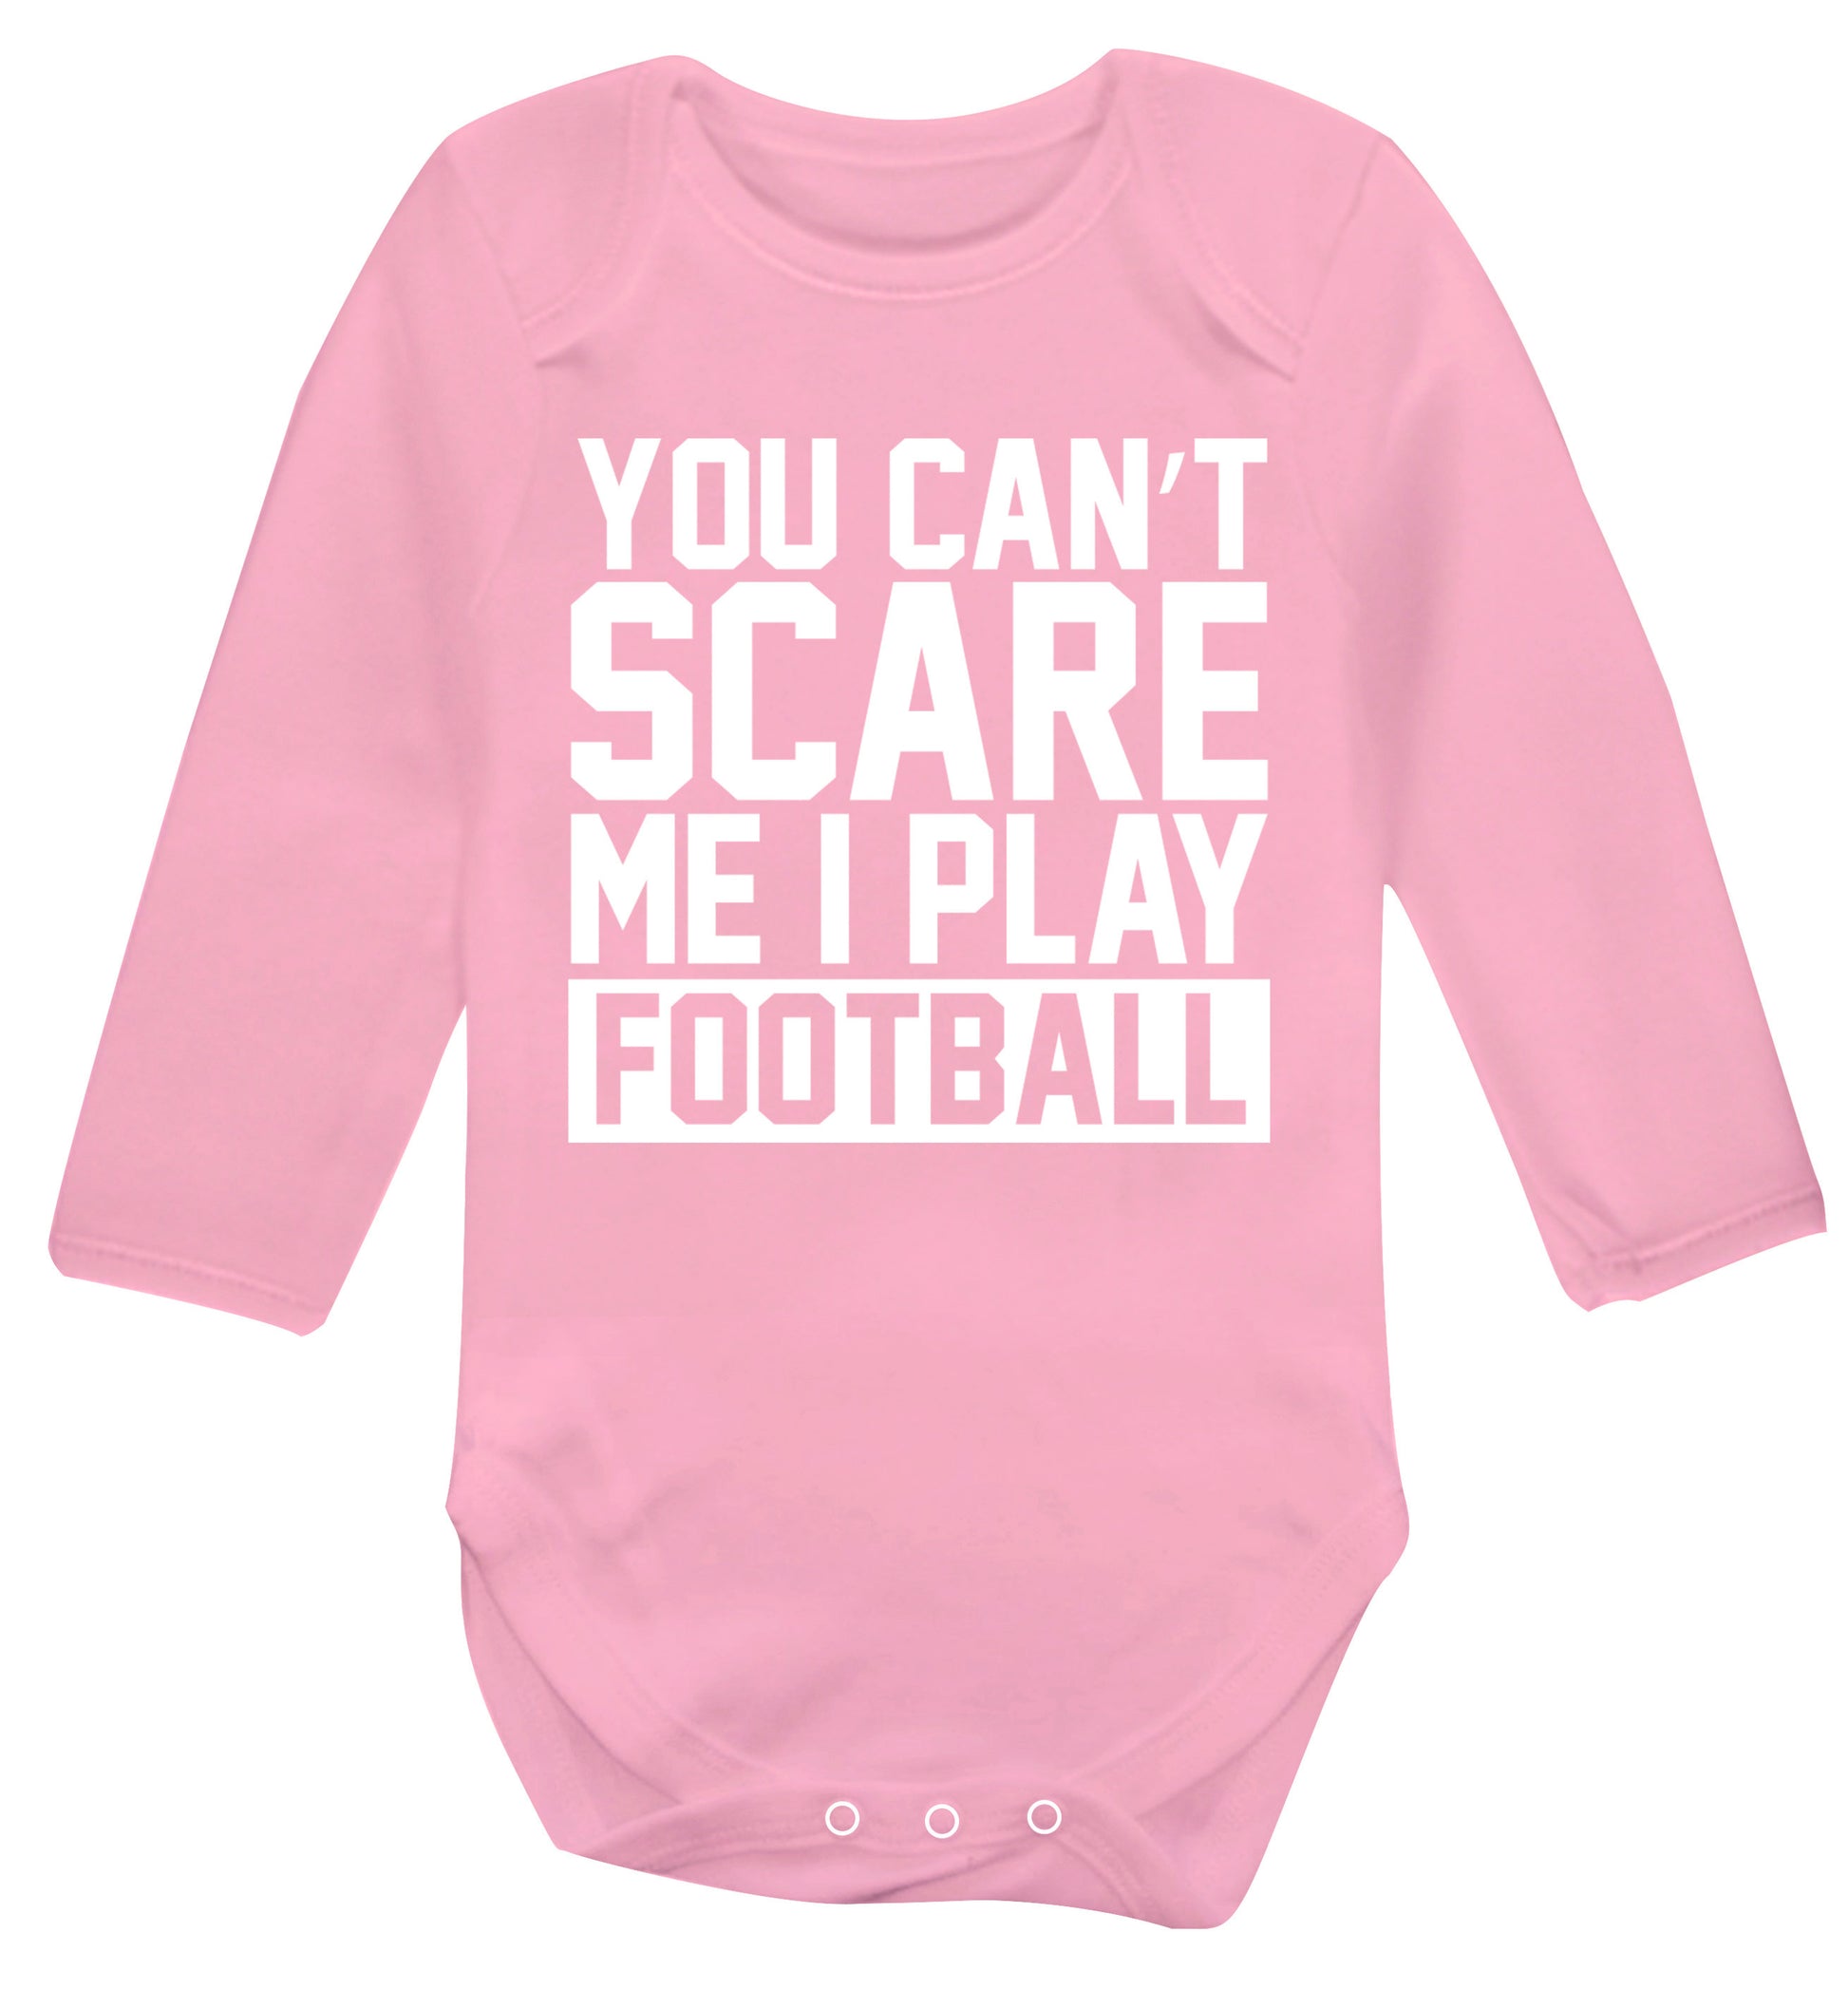 You can't scare me I play football Baby Vest long sleeved pale pink 6-12 months